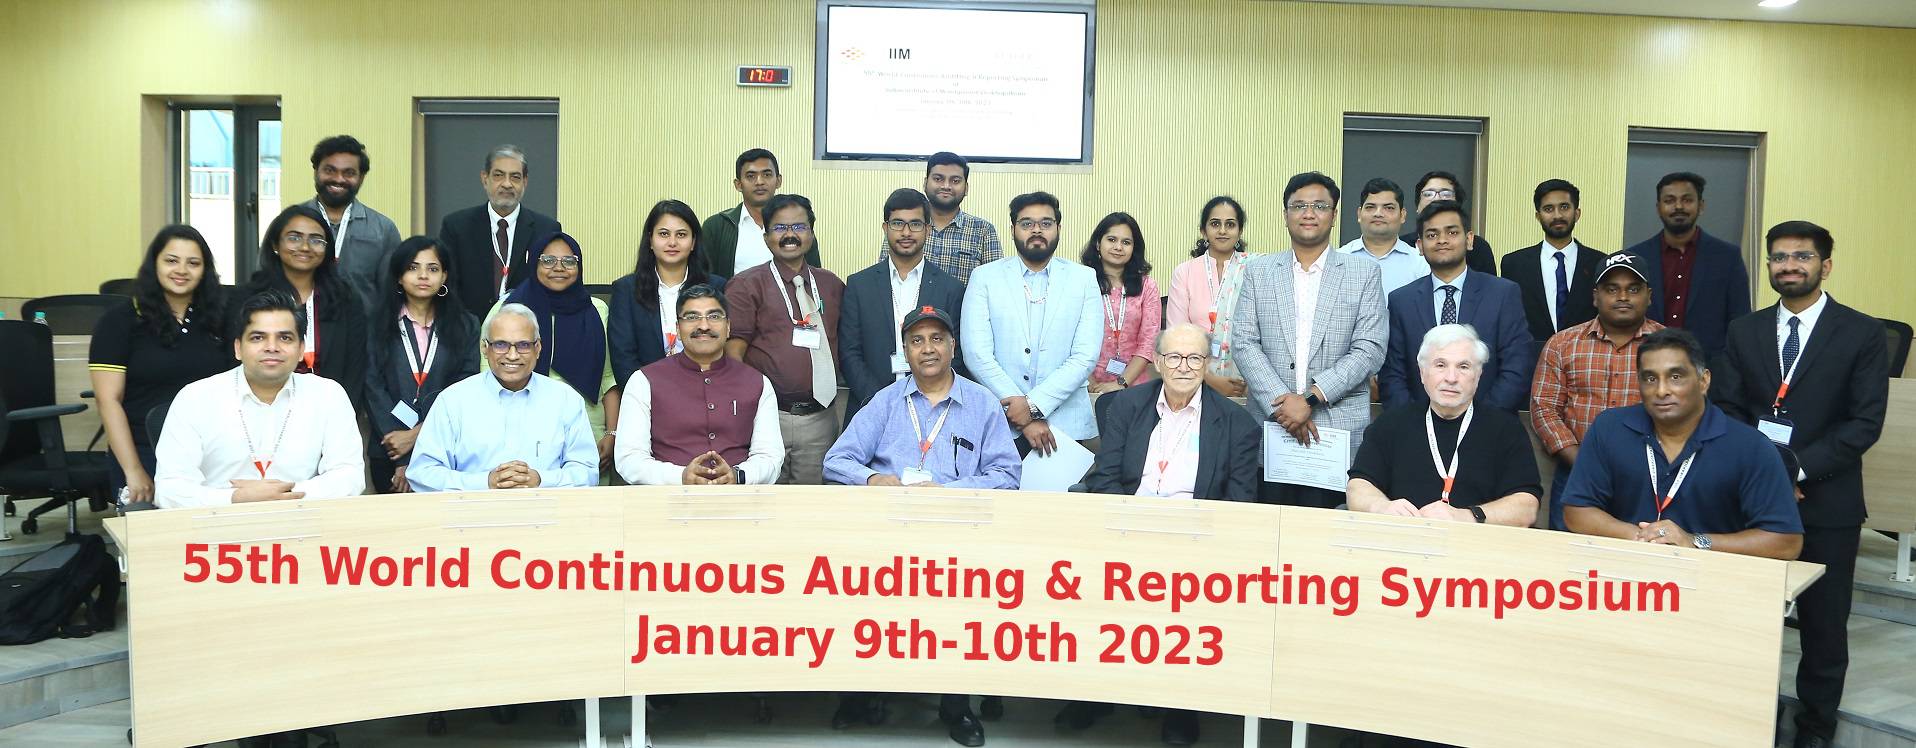 55th World Continuous Auditing & Reporting Symposium